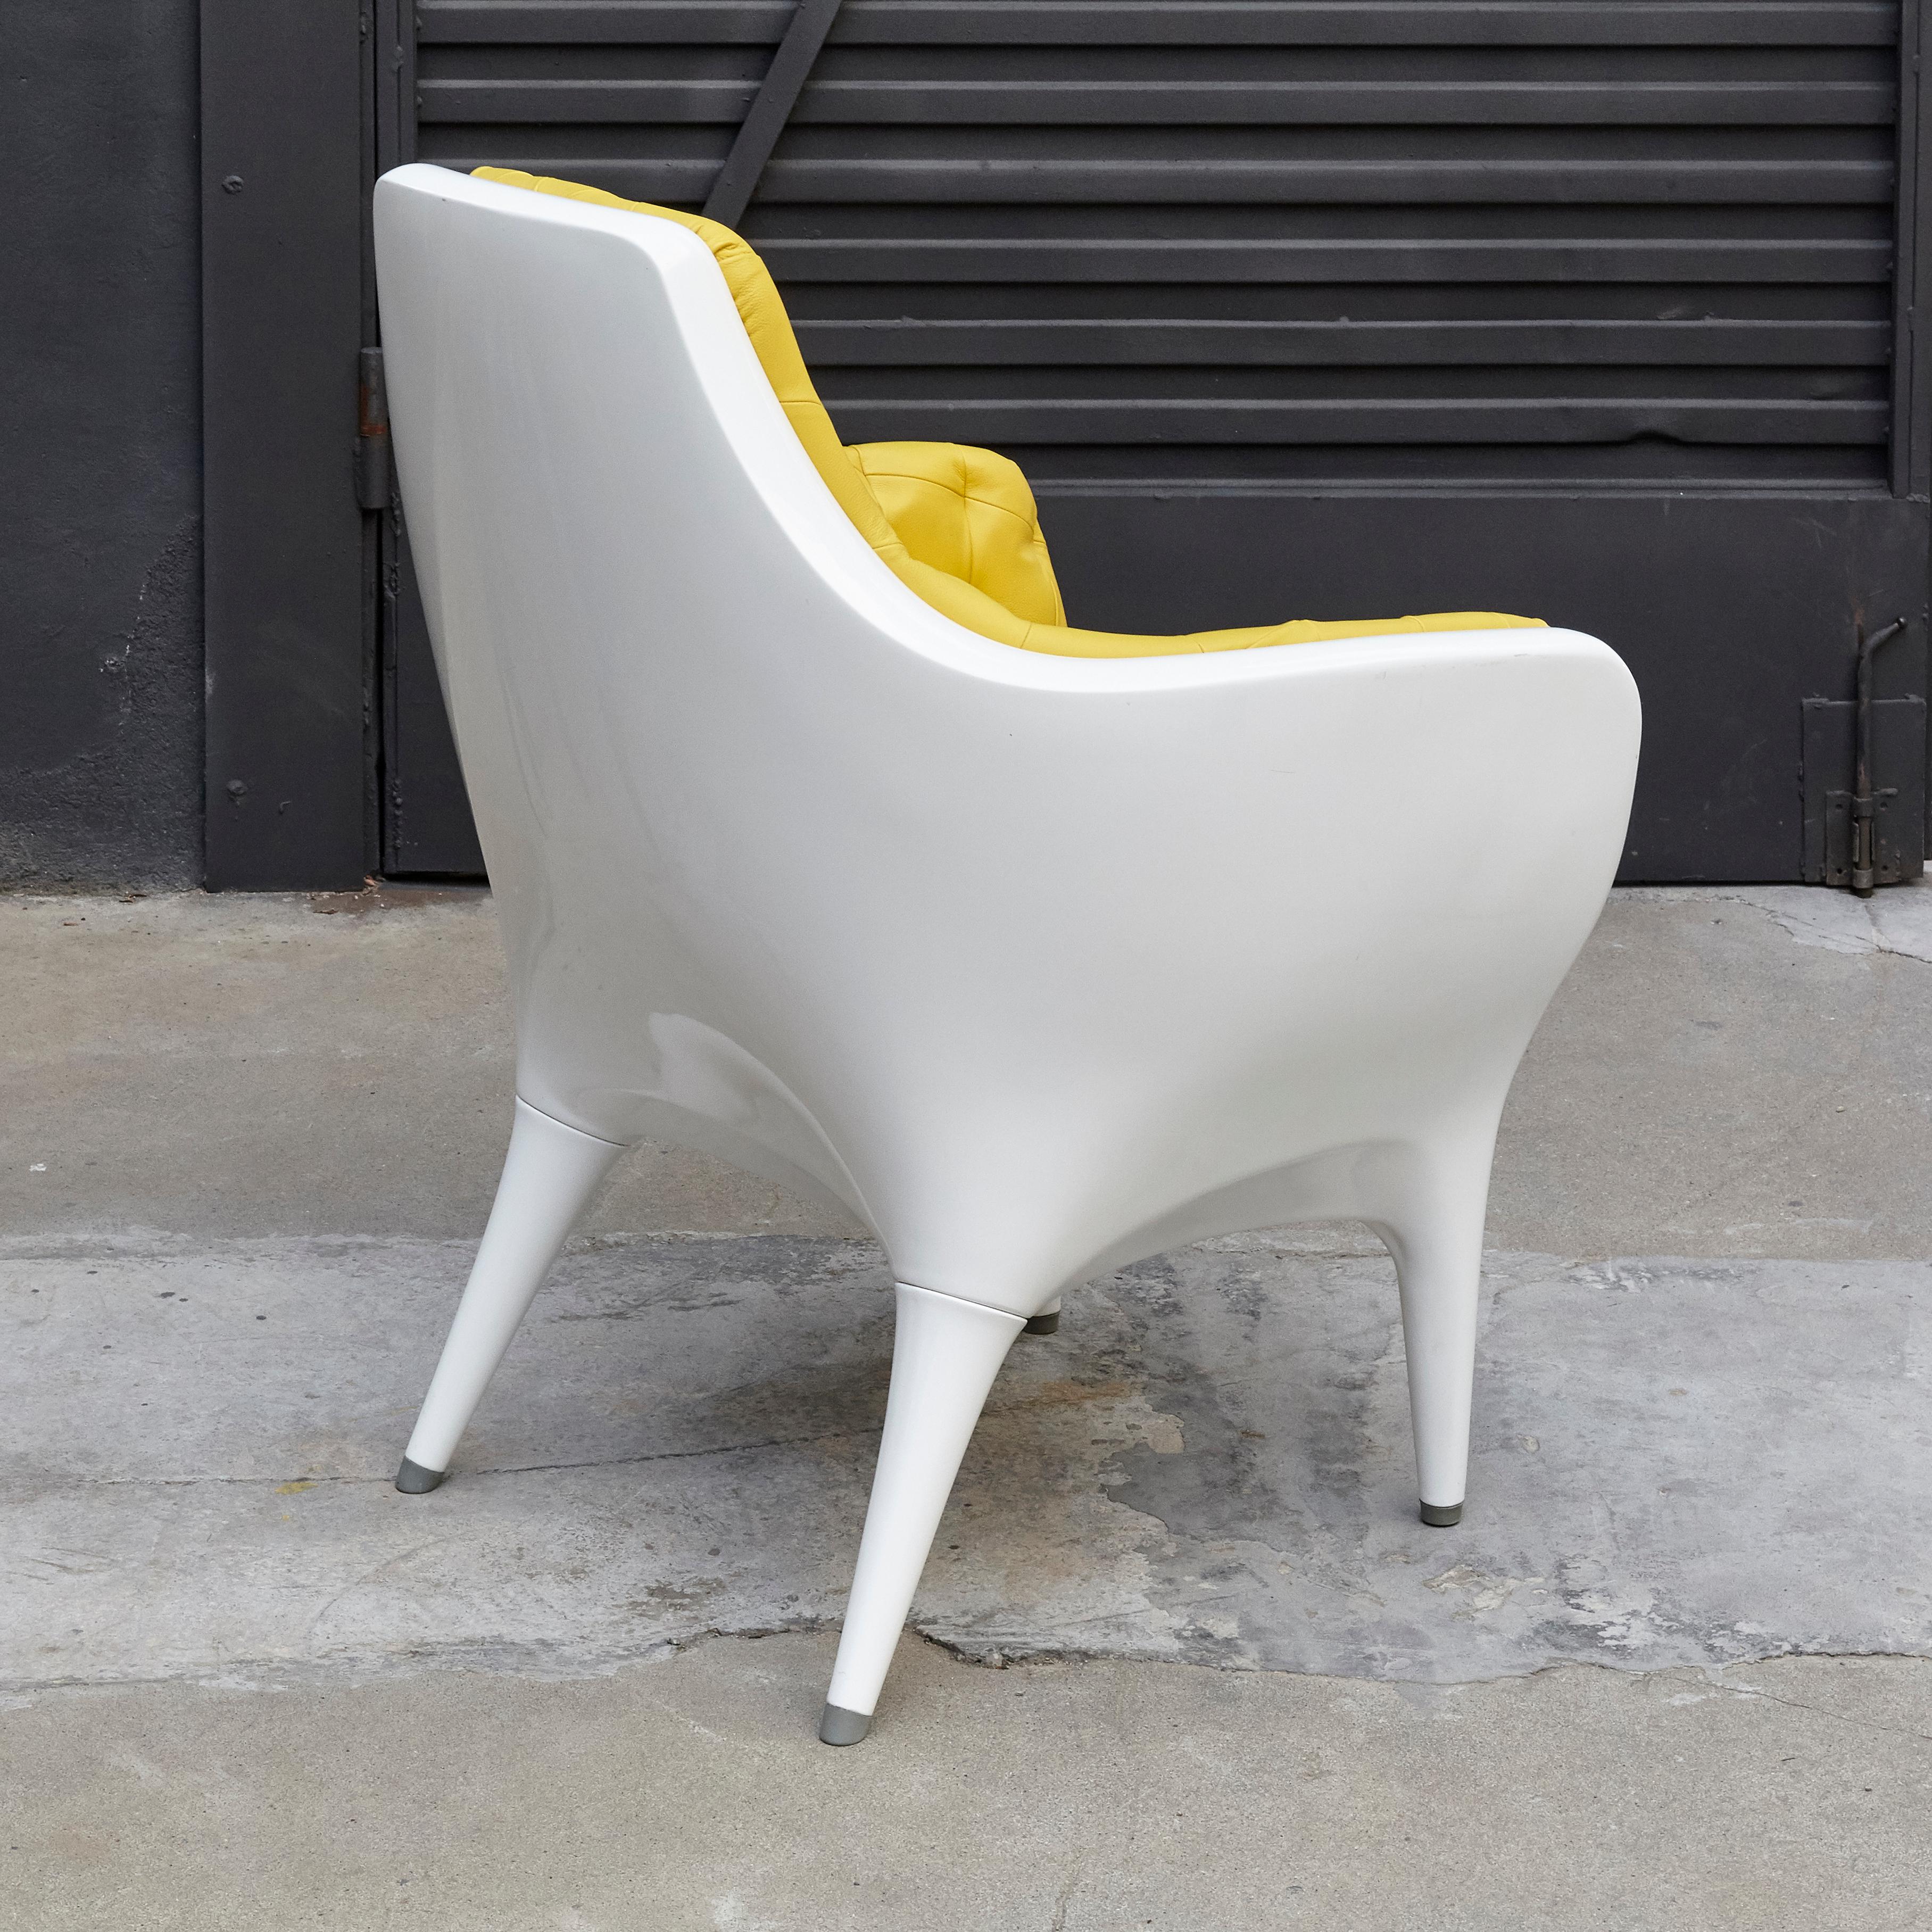 Spanish Jaime Hayon Contemporary Showtime Armchair Lacquered White and Yellow For Sale